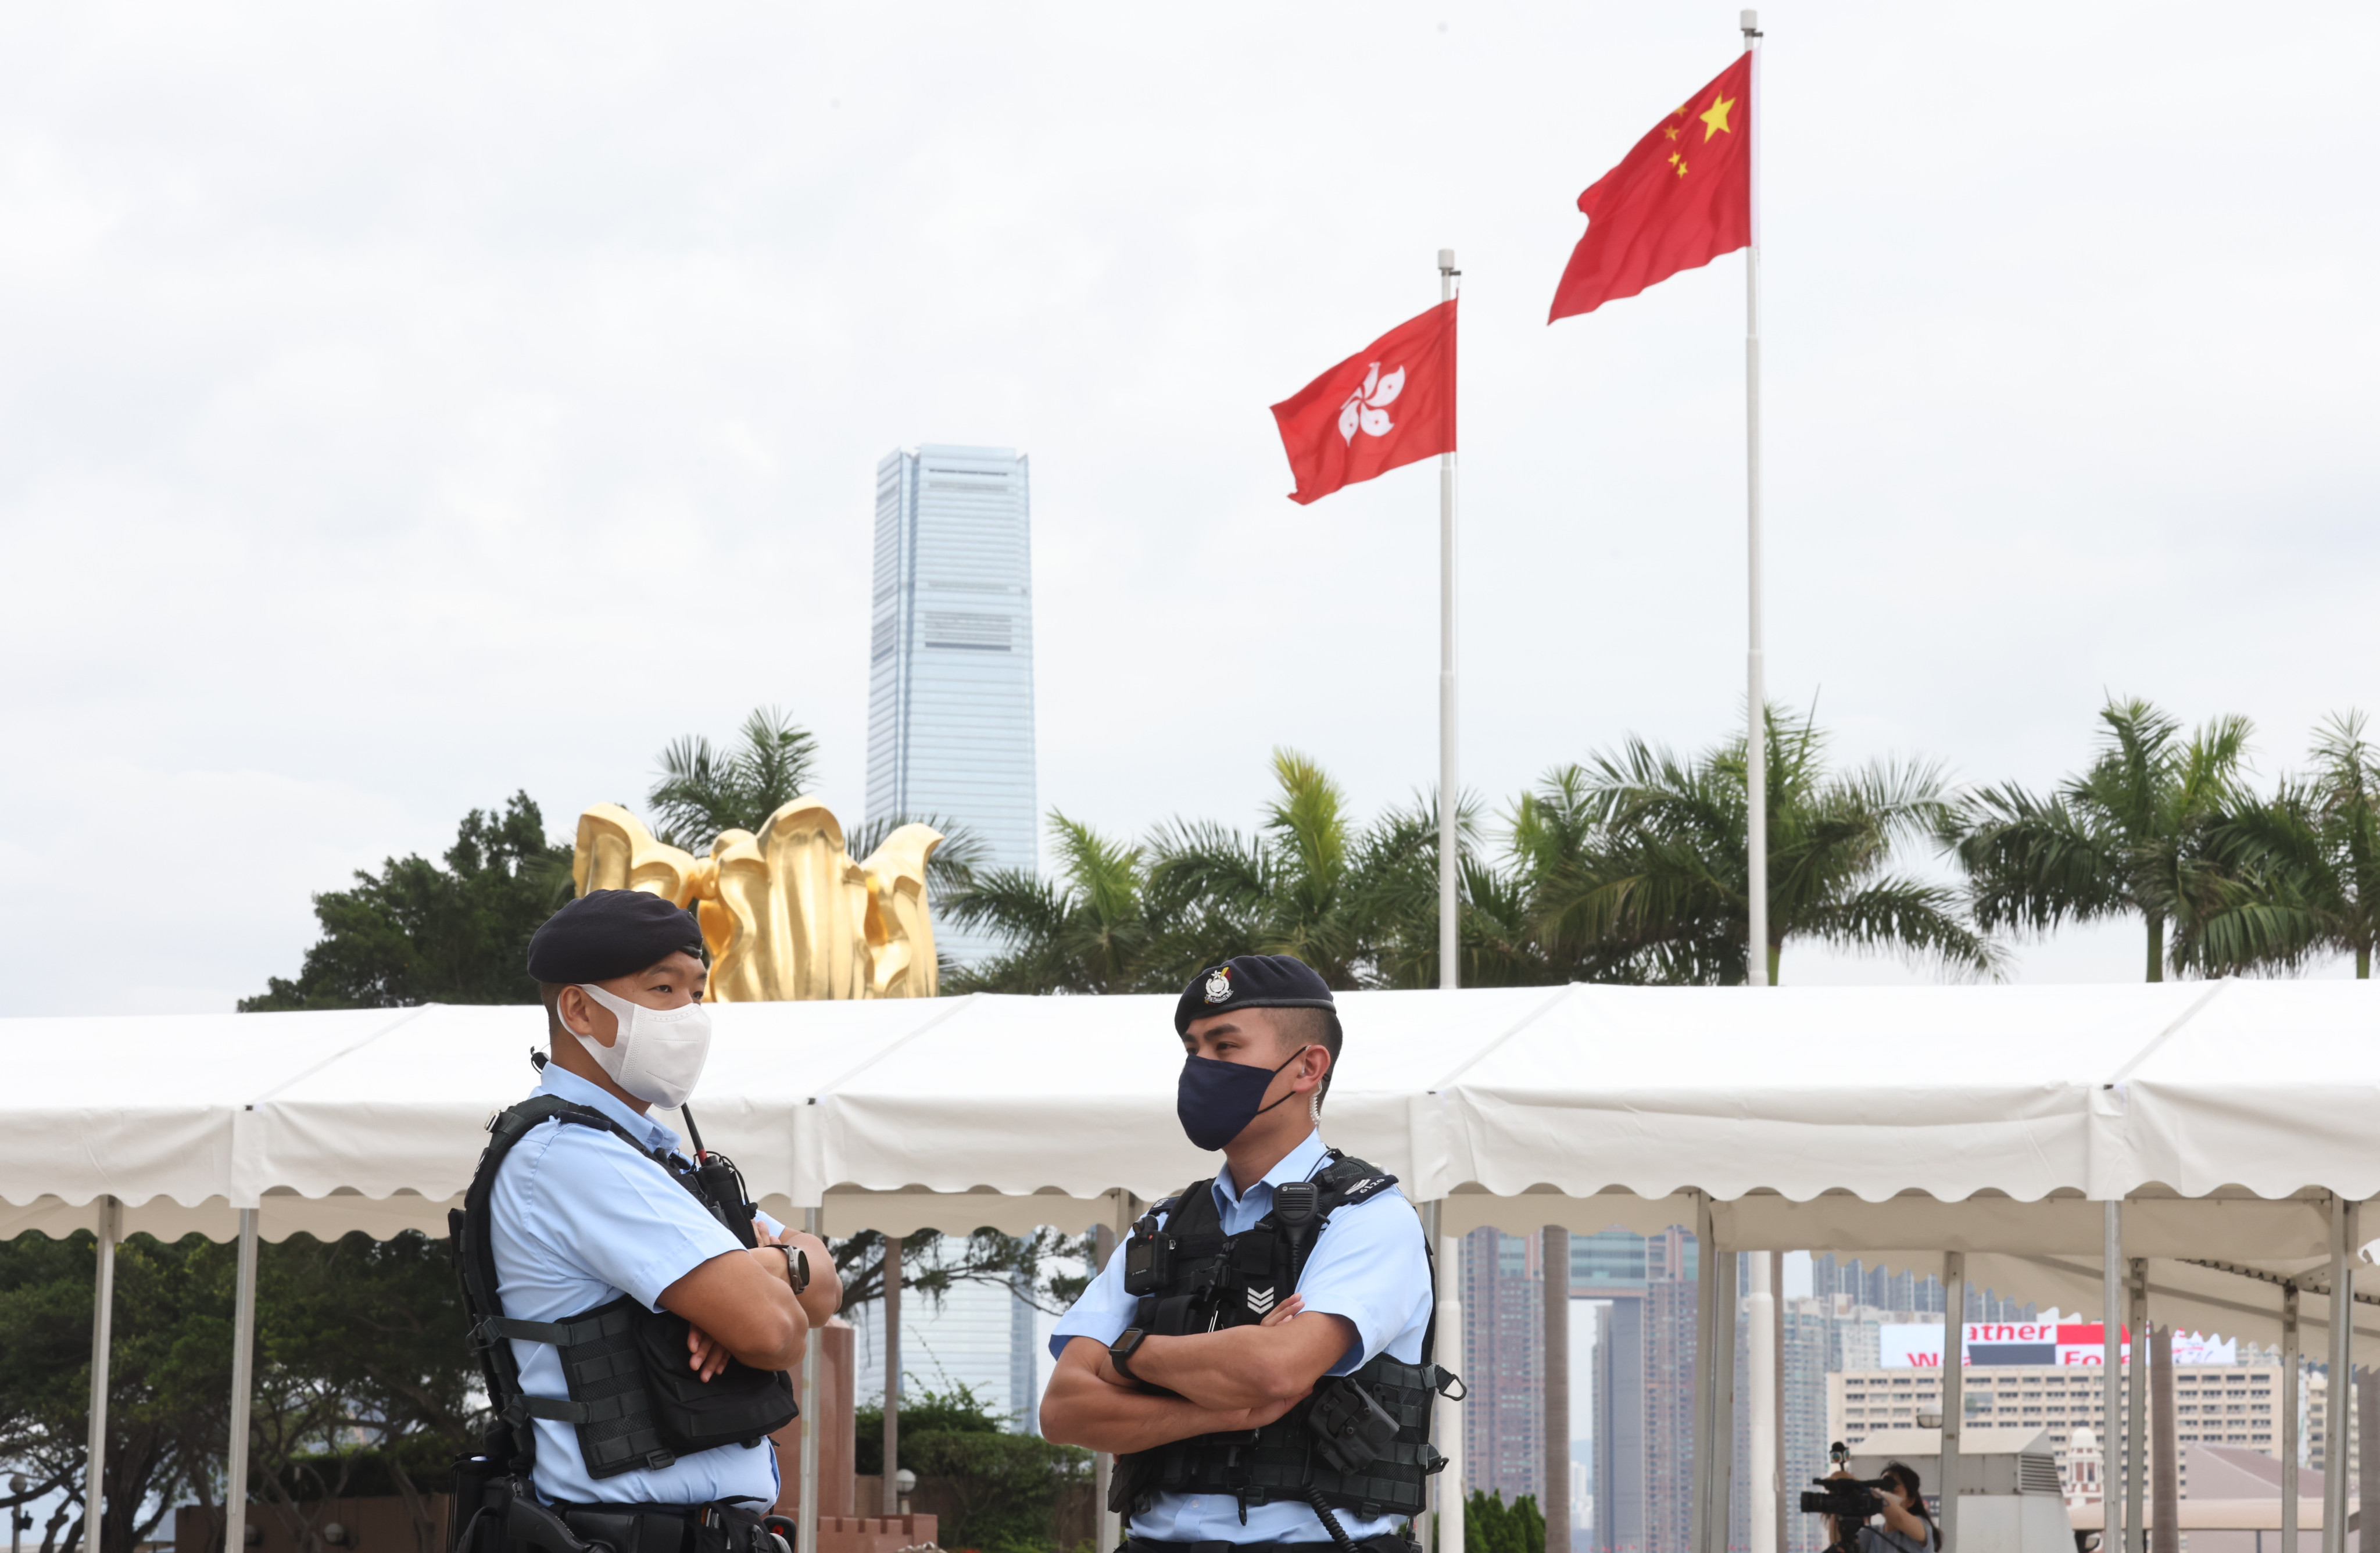 Authorities are still finalising the closed-loop arrangement to ensure the protection of visiting state leaders ahead of celebrations to mark the anniversary of Hong Kong’s return to Chinese rule. Photo: K. Y. Cheng